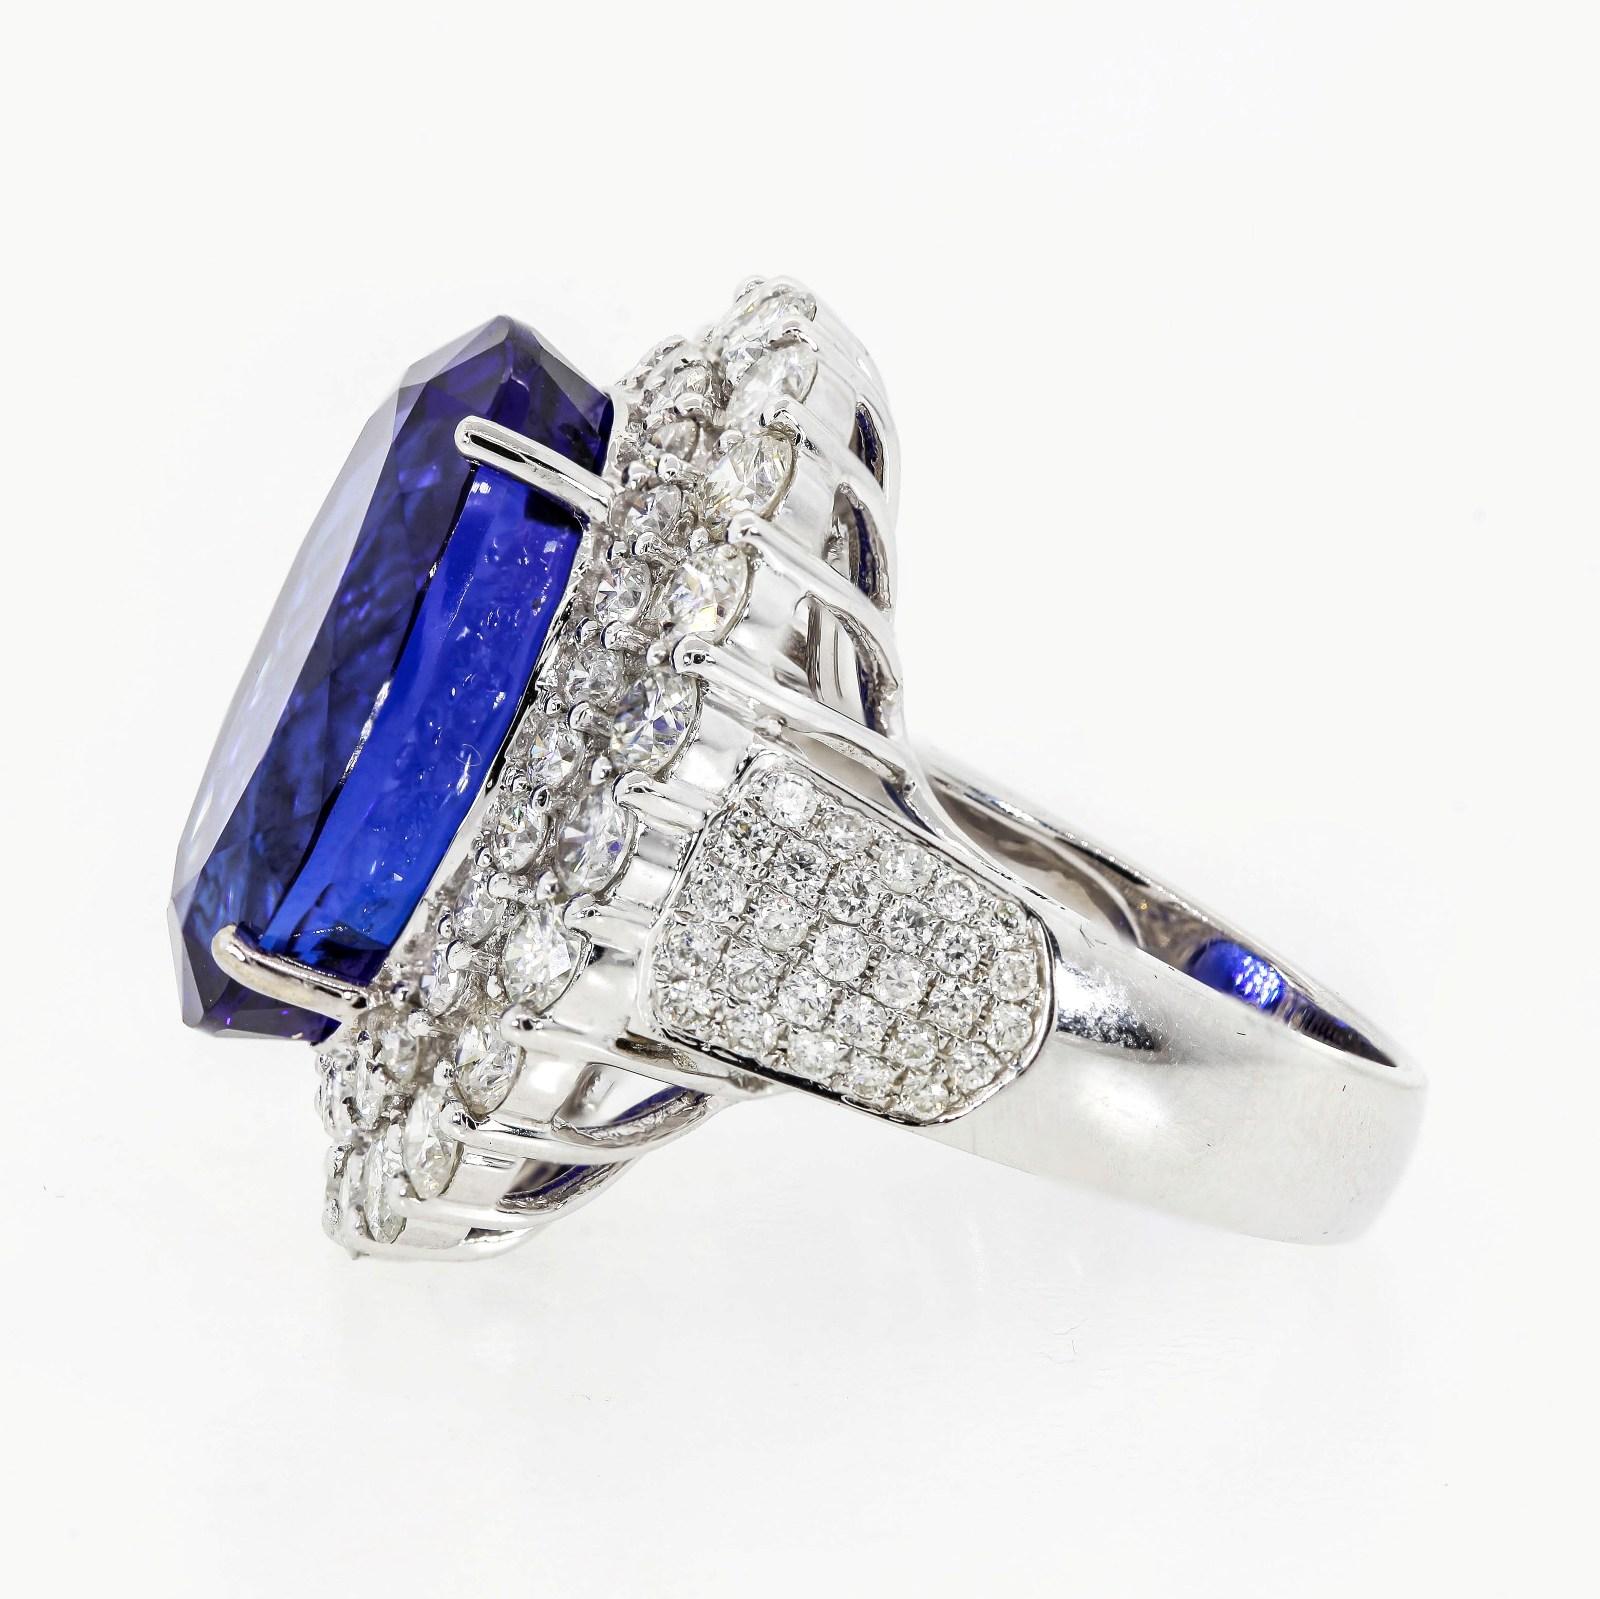 This show stopping bauble features a stunning 22.68 carat oval cut Tanzanite of beautiful deep Royal blue color.  Set in an 18KT white gold, surrounded by concentric rings of sparkly white Round Brilliant Cut Diamonds.  All diamonds weigh 4.30 carat